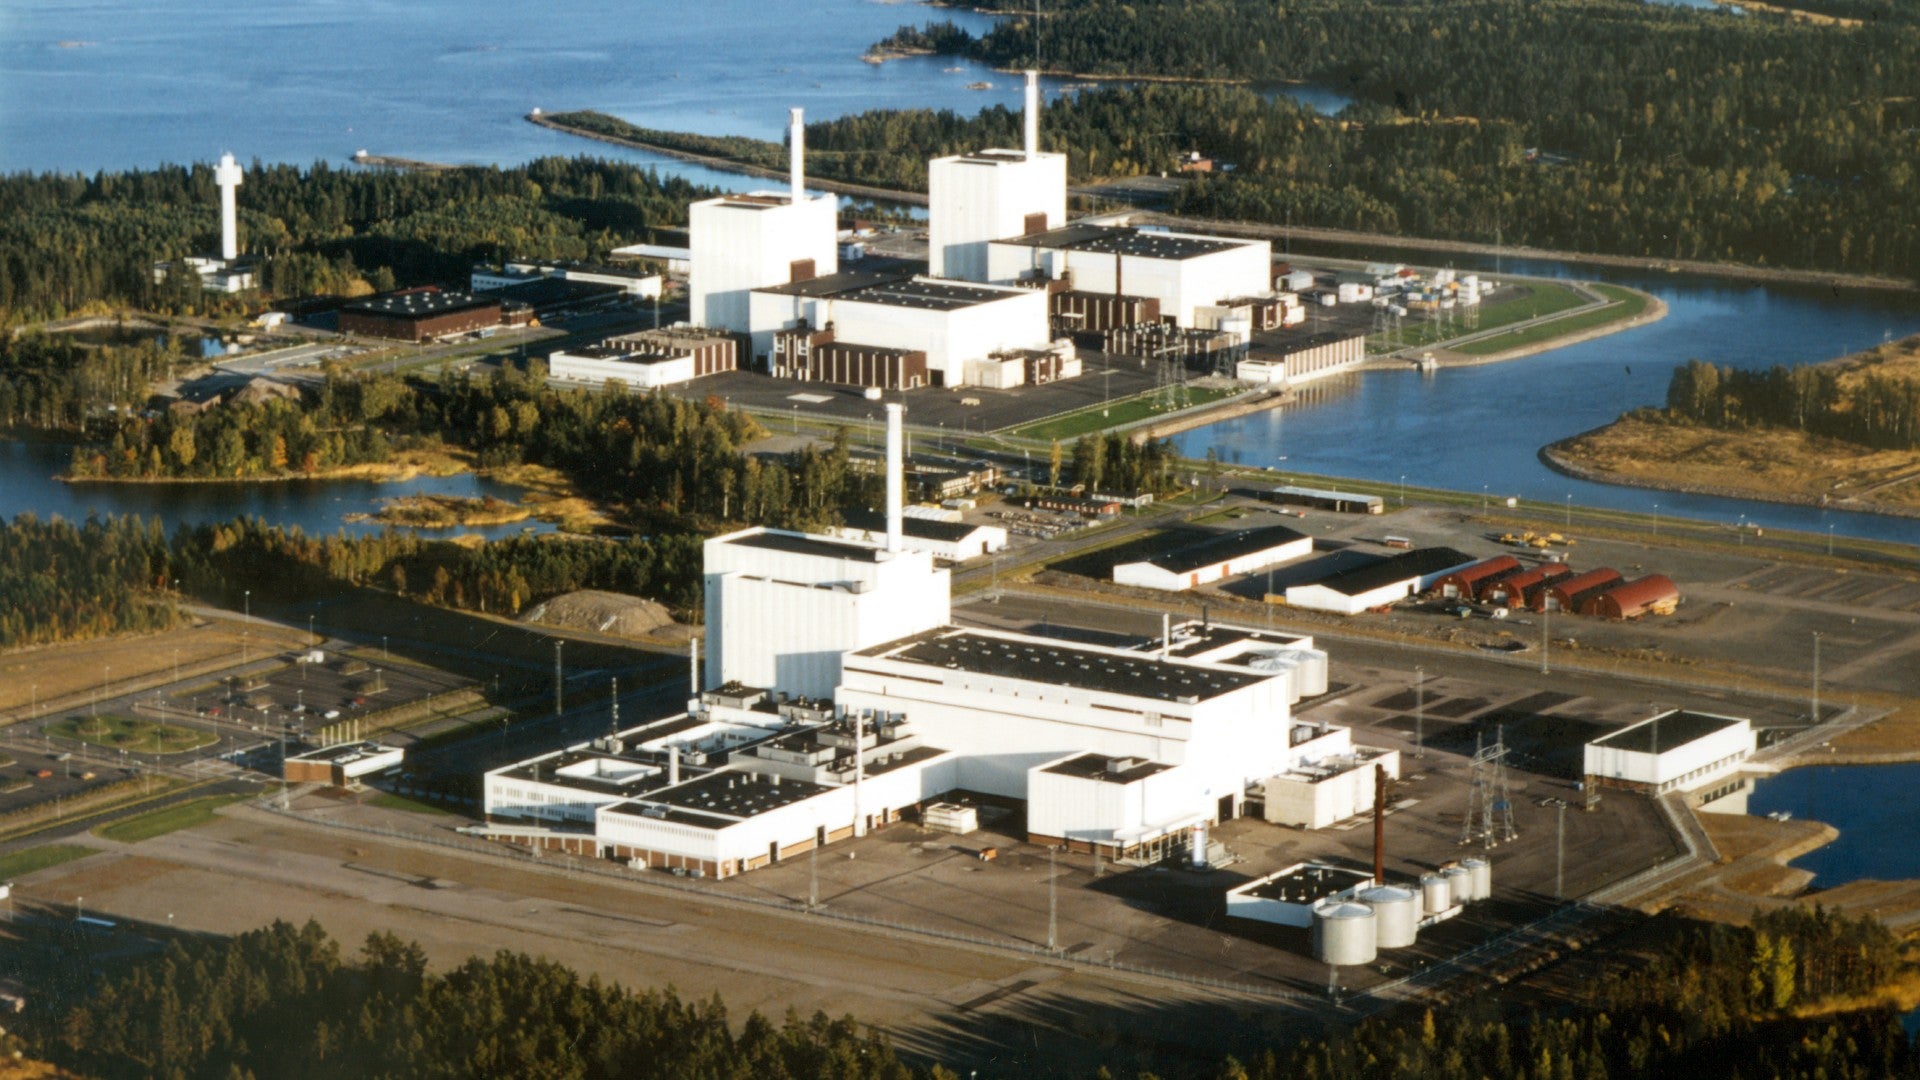 beton muskel Kanin Mysterious Drone Incursions Confirmed Over Sweden's Nuclear Facilities